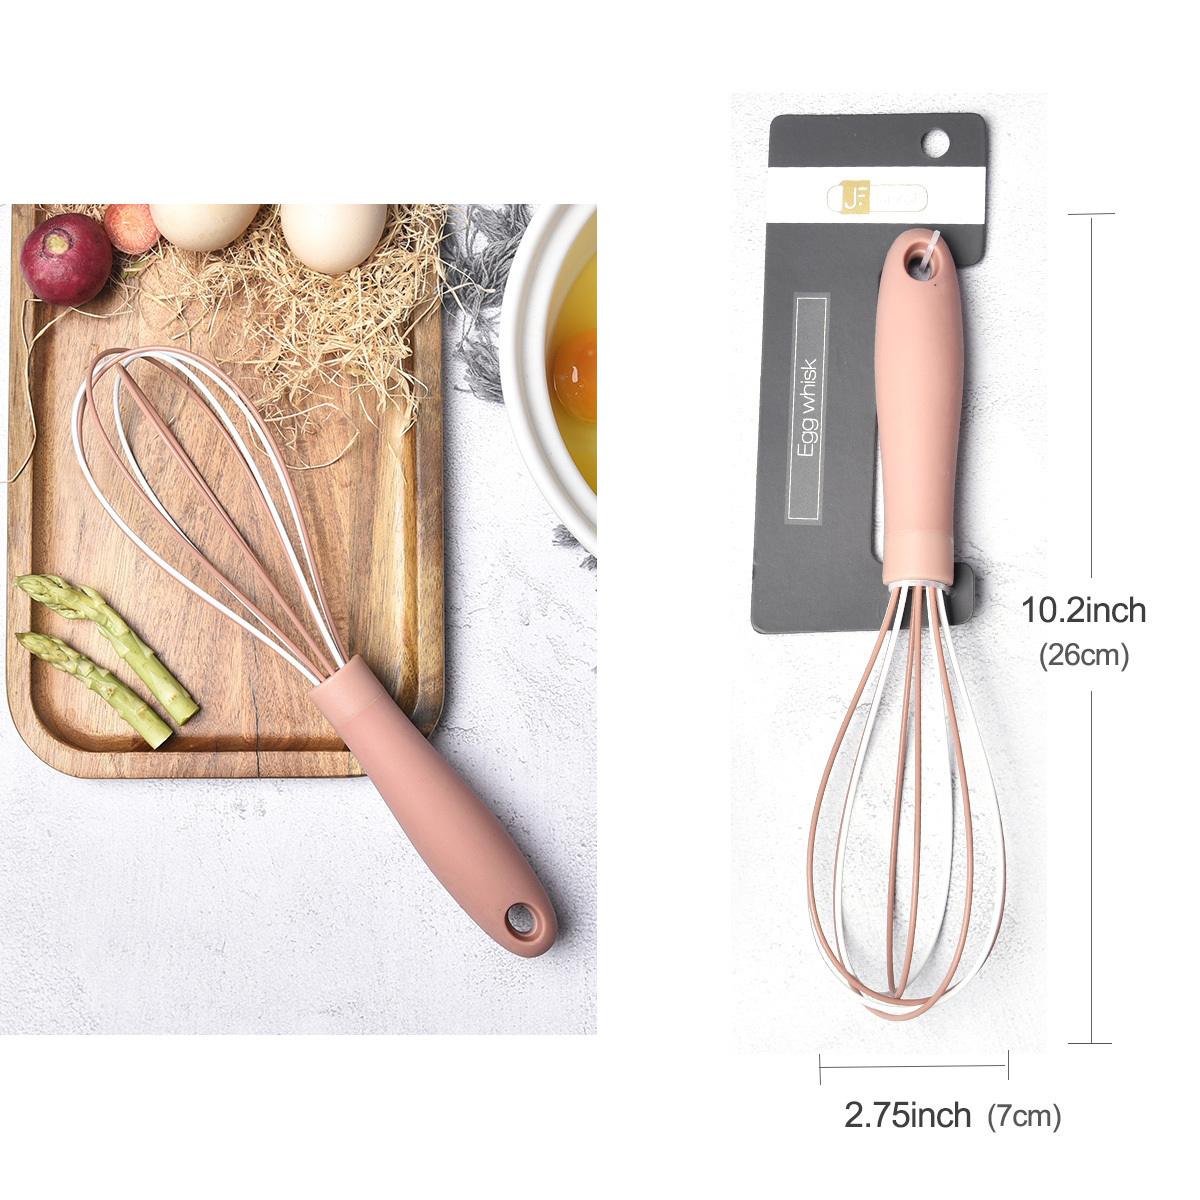 NiftyPlaza 8 inch Egg Beater Whisks Colored Silicone Mini Whisk Baking Blending Cooking Whisking Beating Stirring - Blue